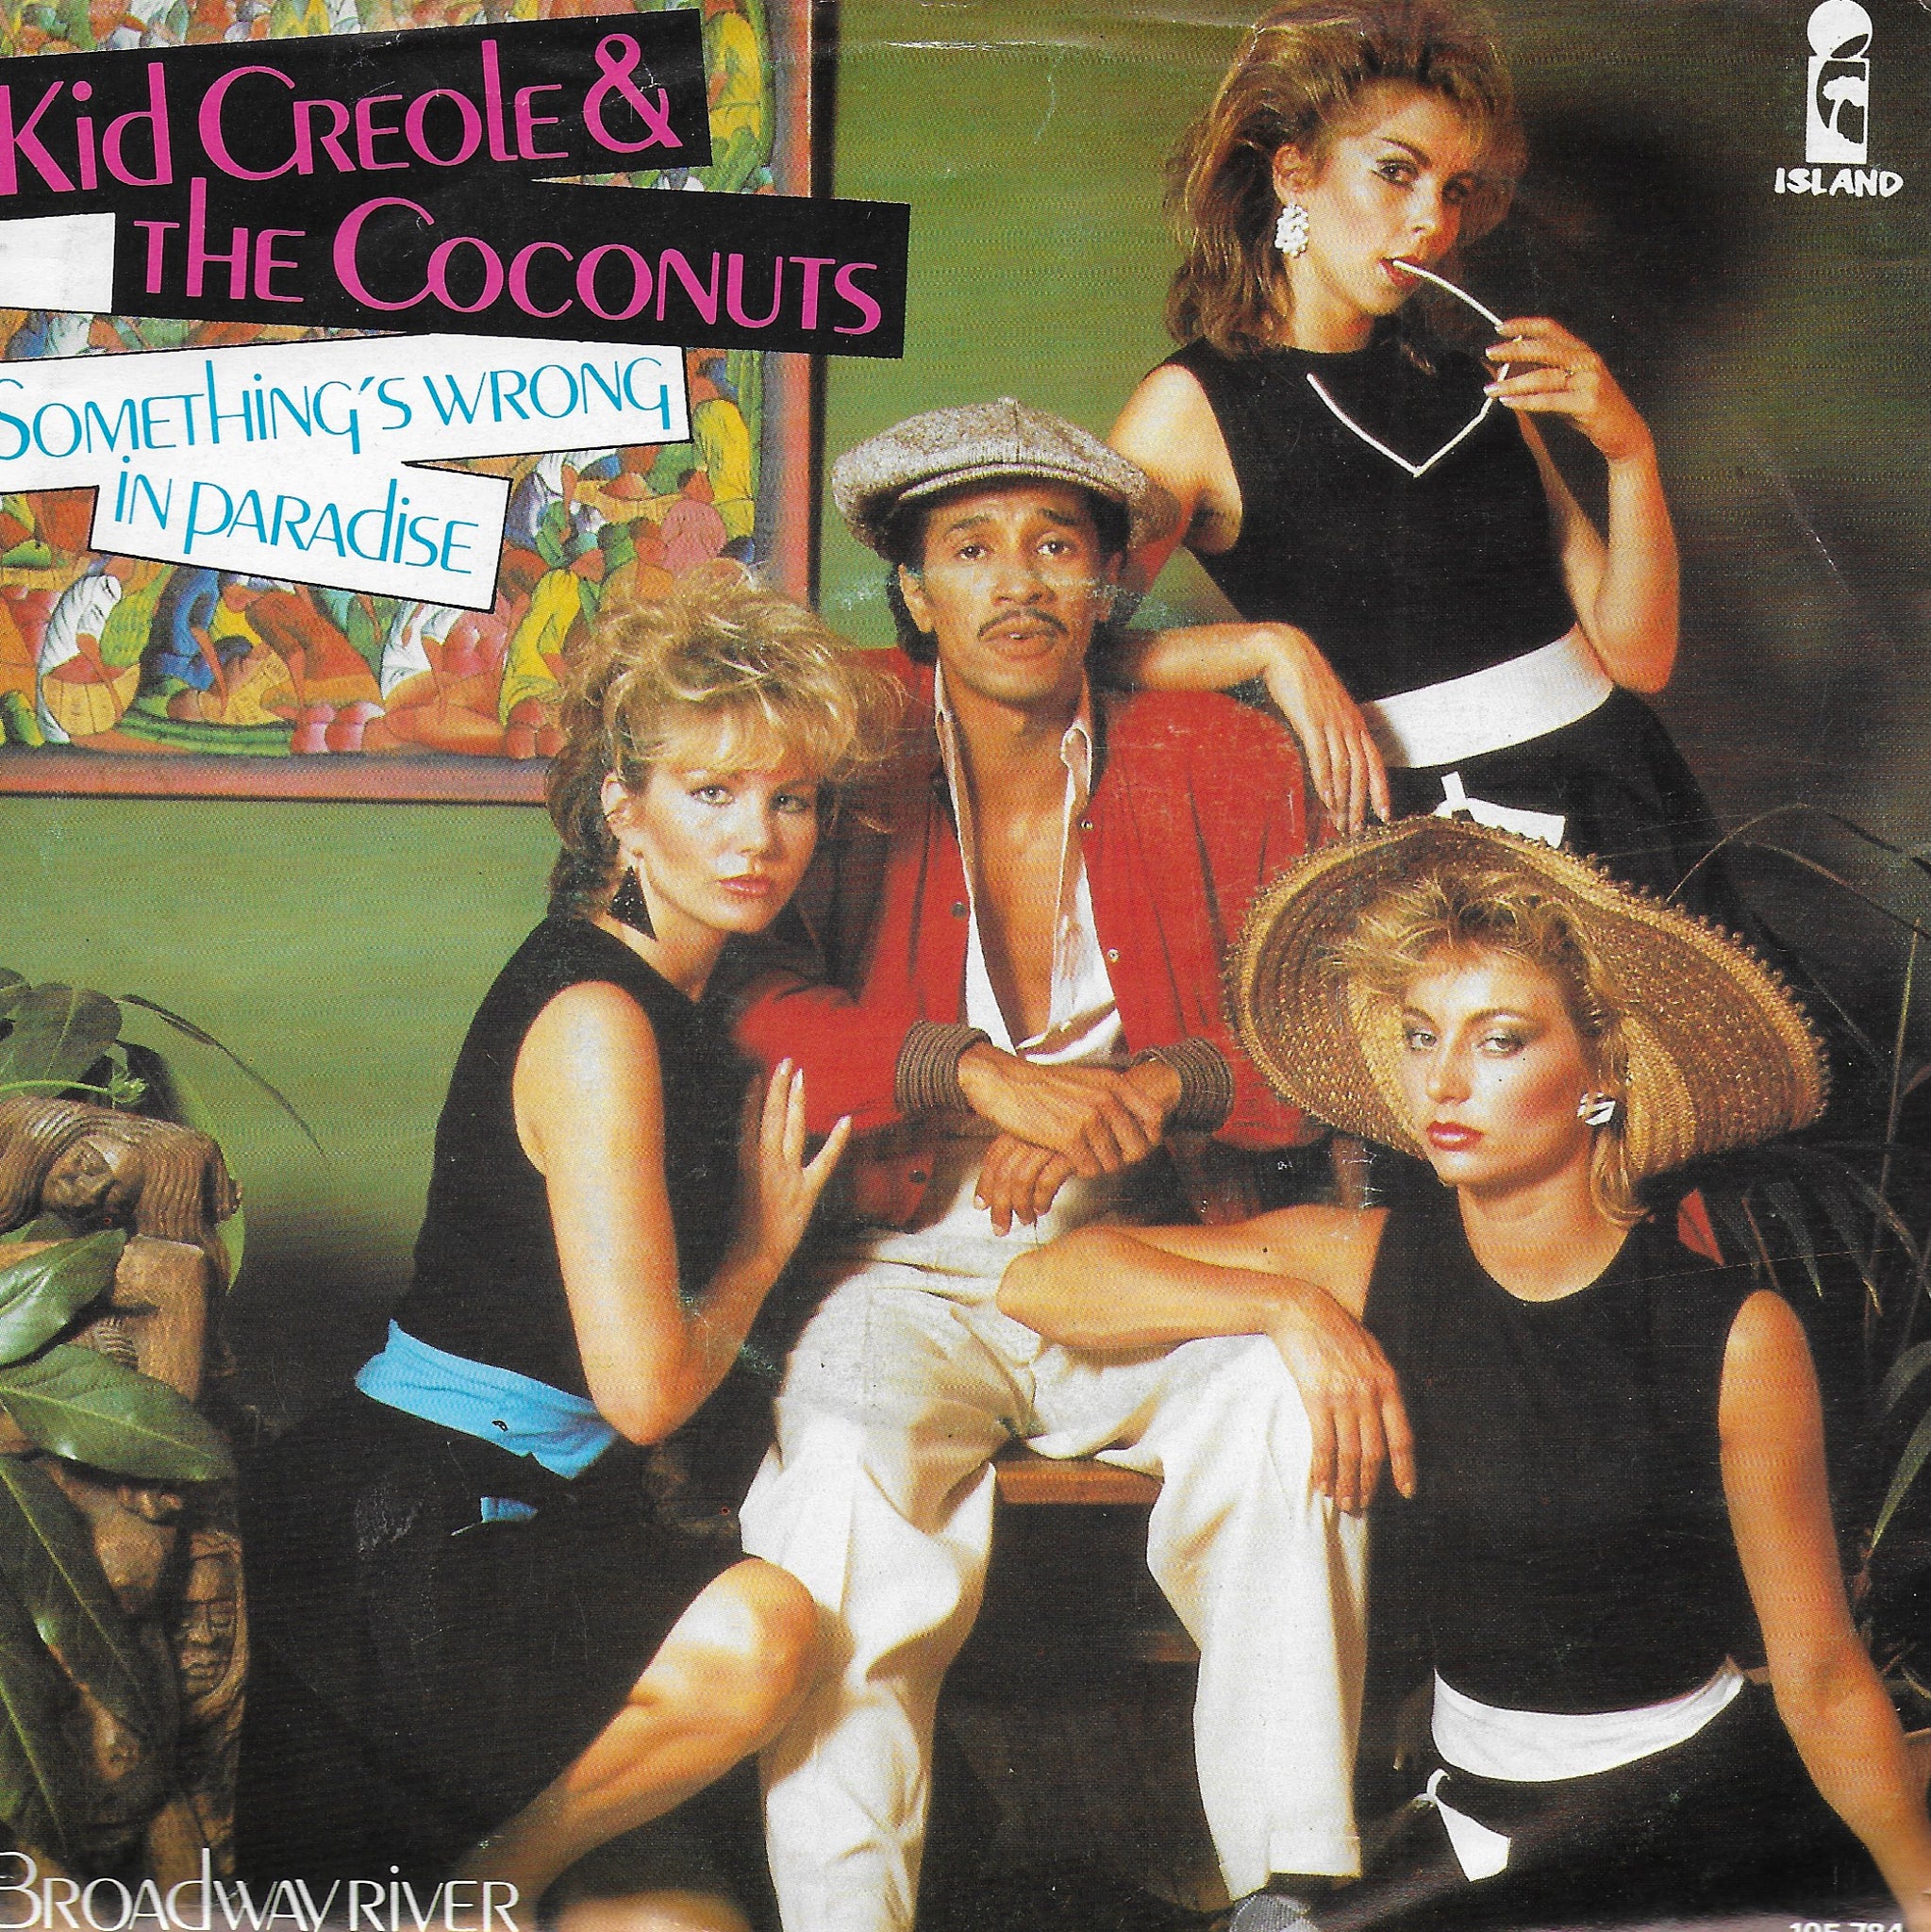 Kid Creole & the Coconuts - Something's wrong in paradise